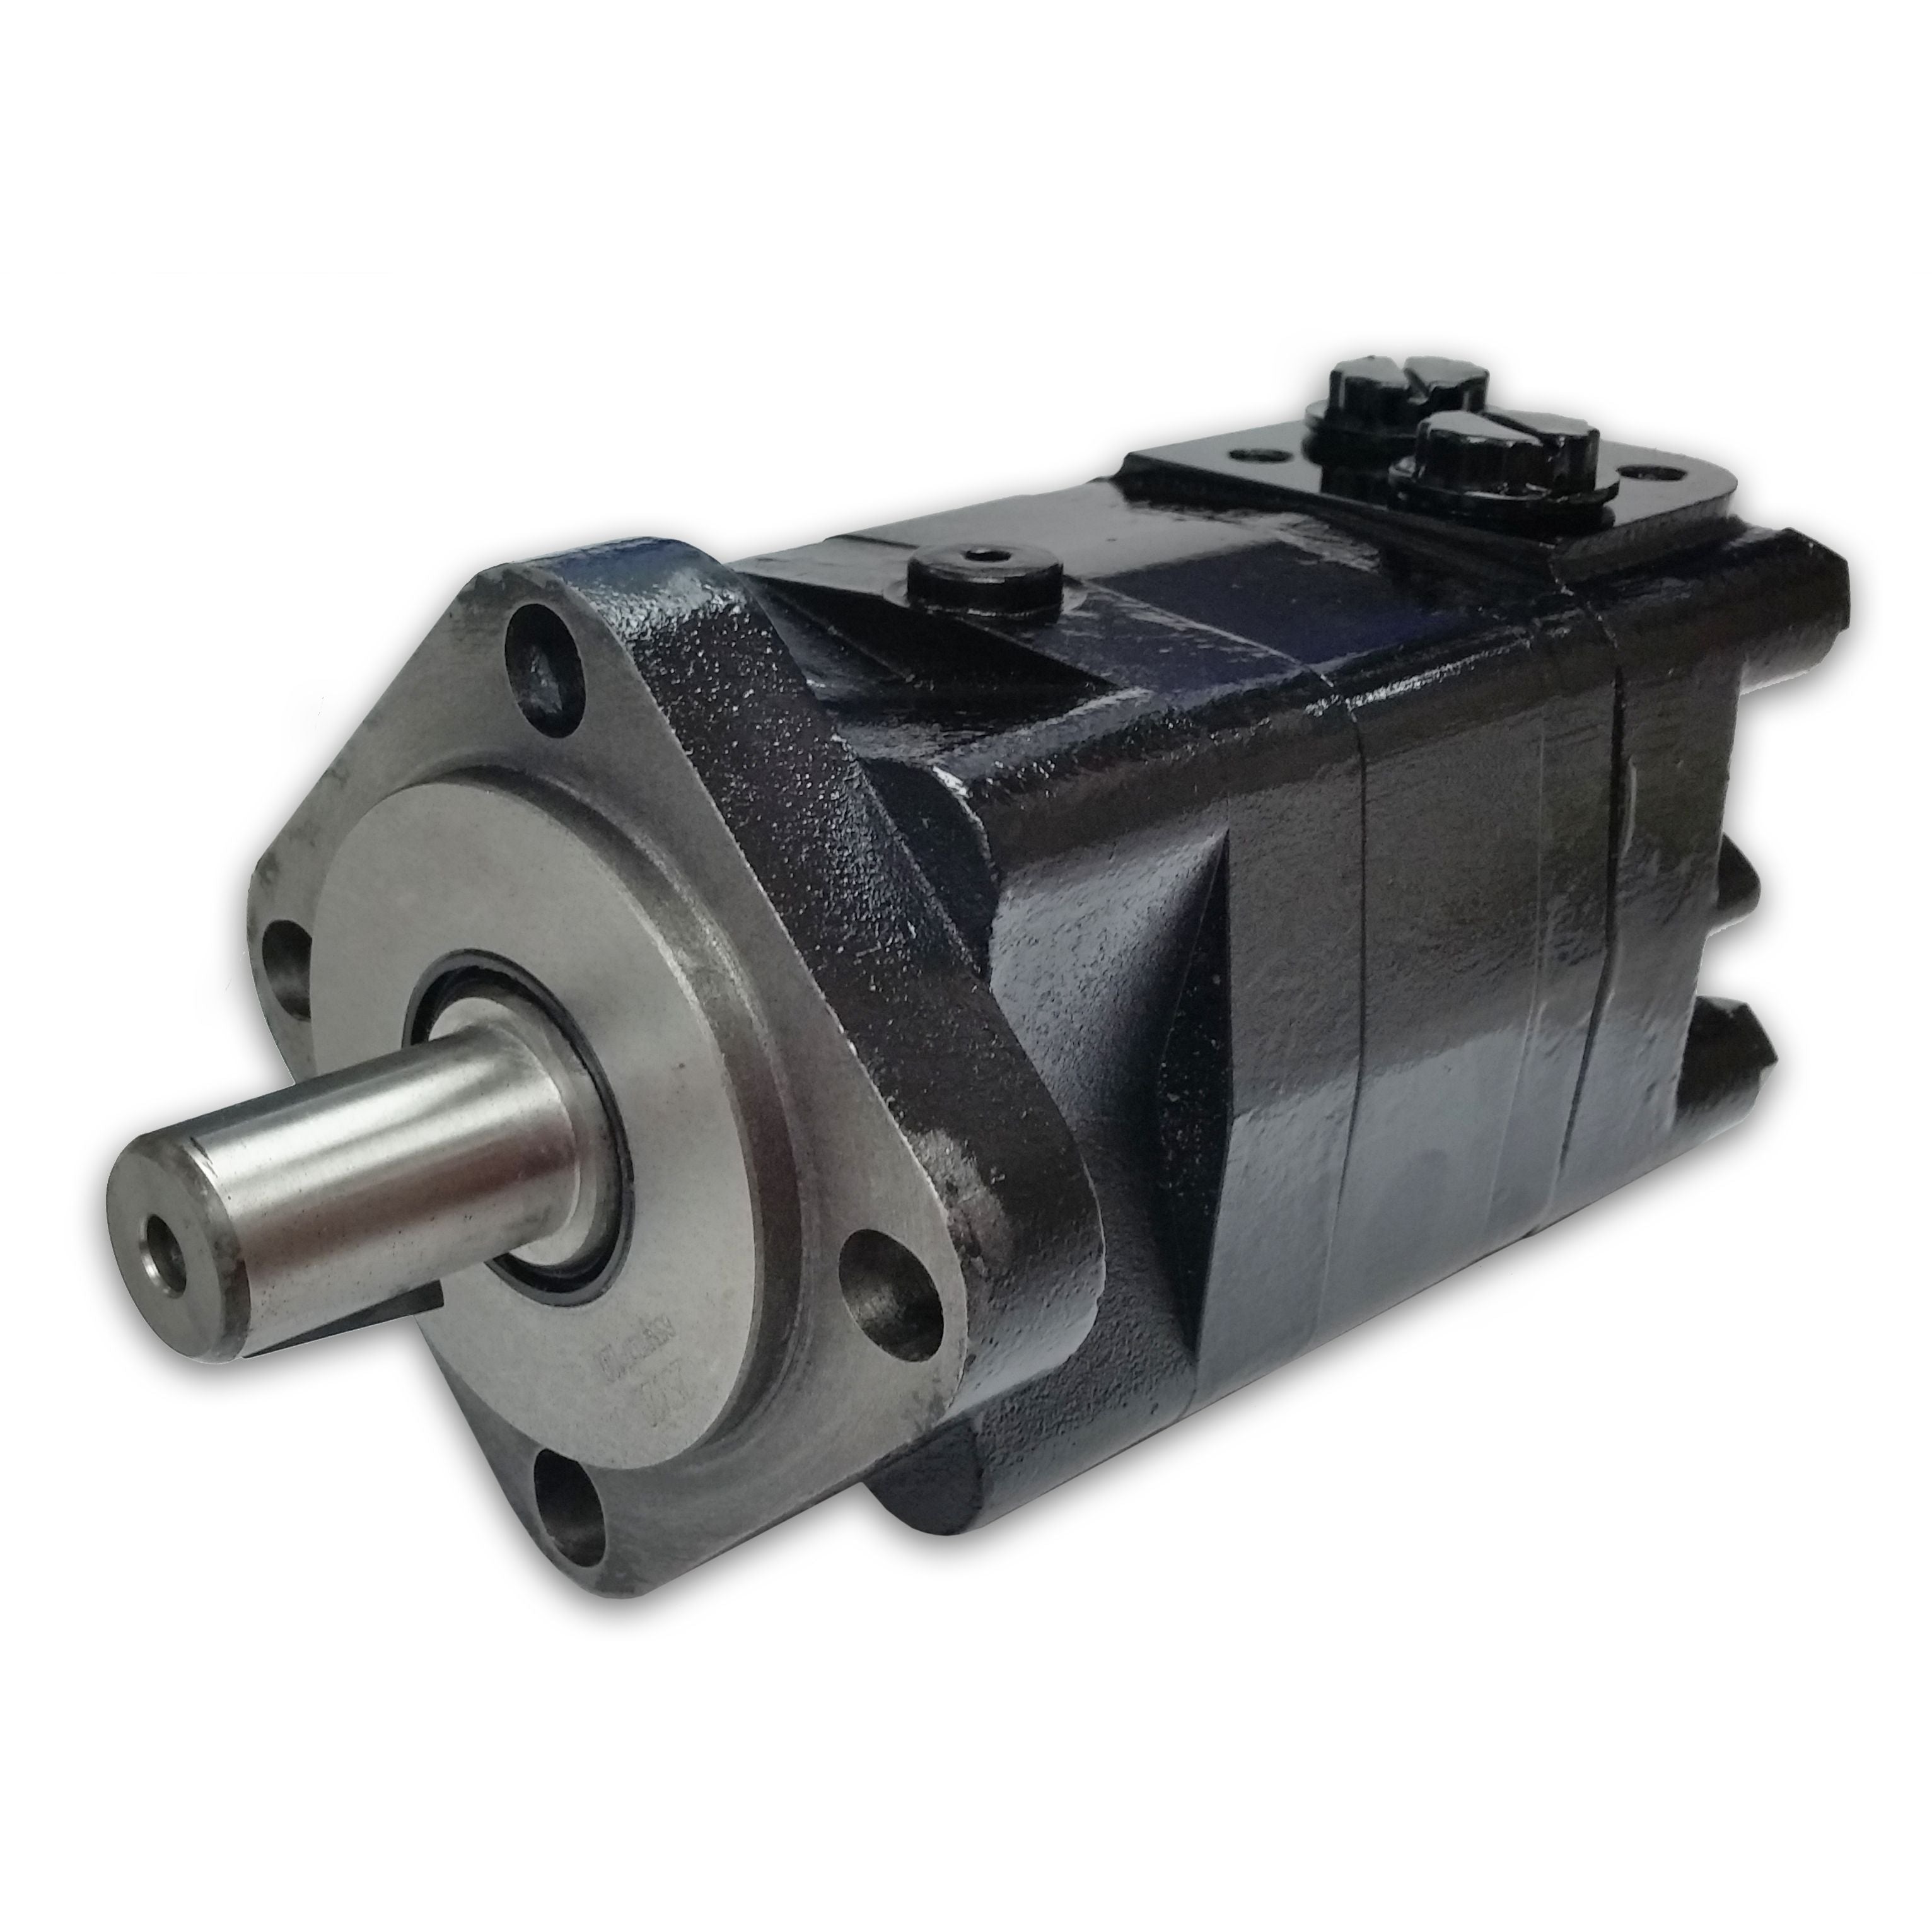 BMSY-160-E4-K-S : Dynamic LSHT Motor, 154cc, 470RPM, 4292in-lb, 3045psi Differential, 19.81GPM, SAE A 4-Bolt Mount, 1" Bore x 1/4" Key Shaft, Side Ported, #10 SAE (5/8")